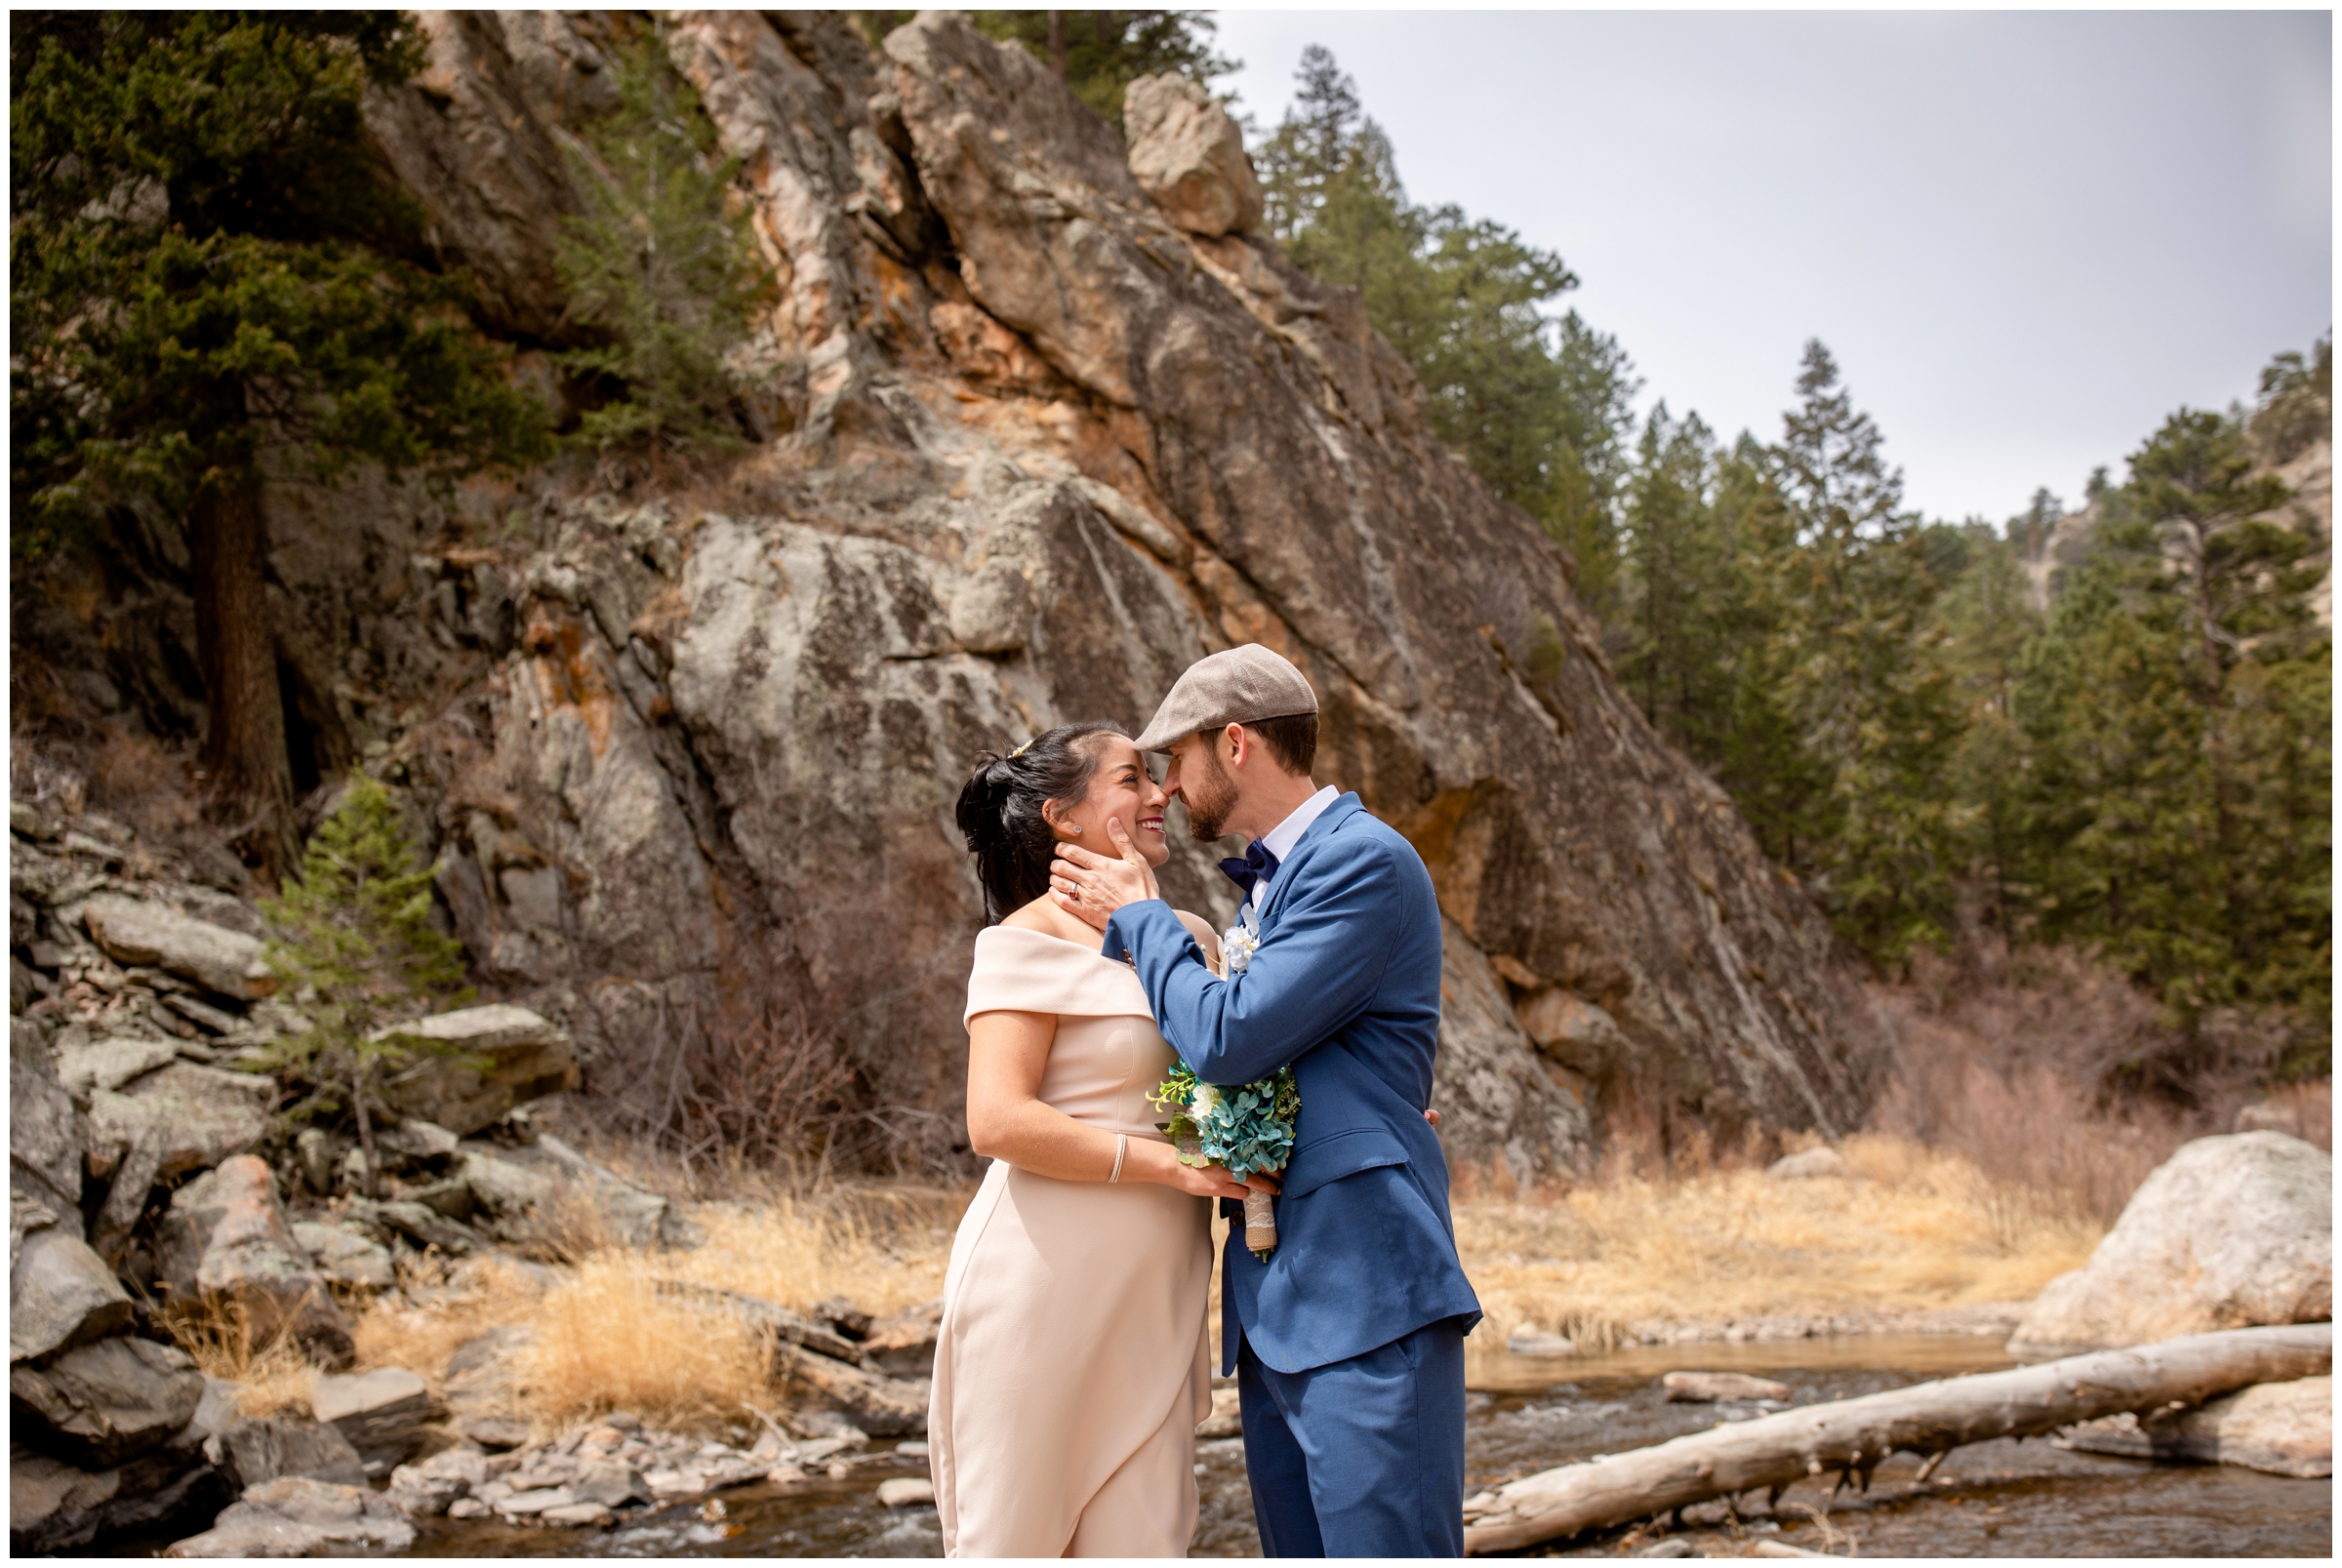 Loveland Colorado wedding photos by the river in Big Thompson Canyon during spring by elopement photographer Plum Pretty Photography